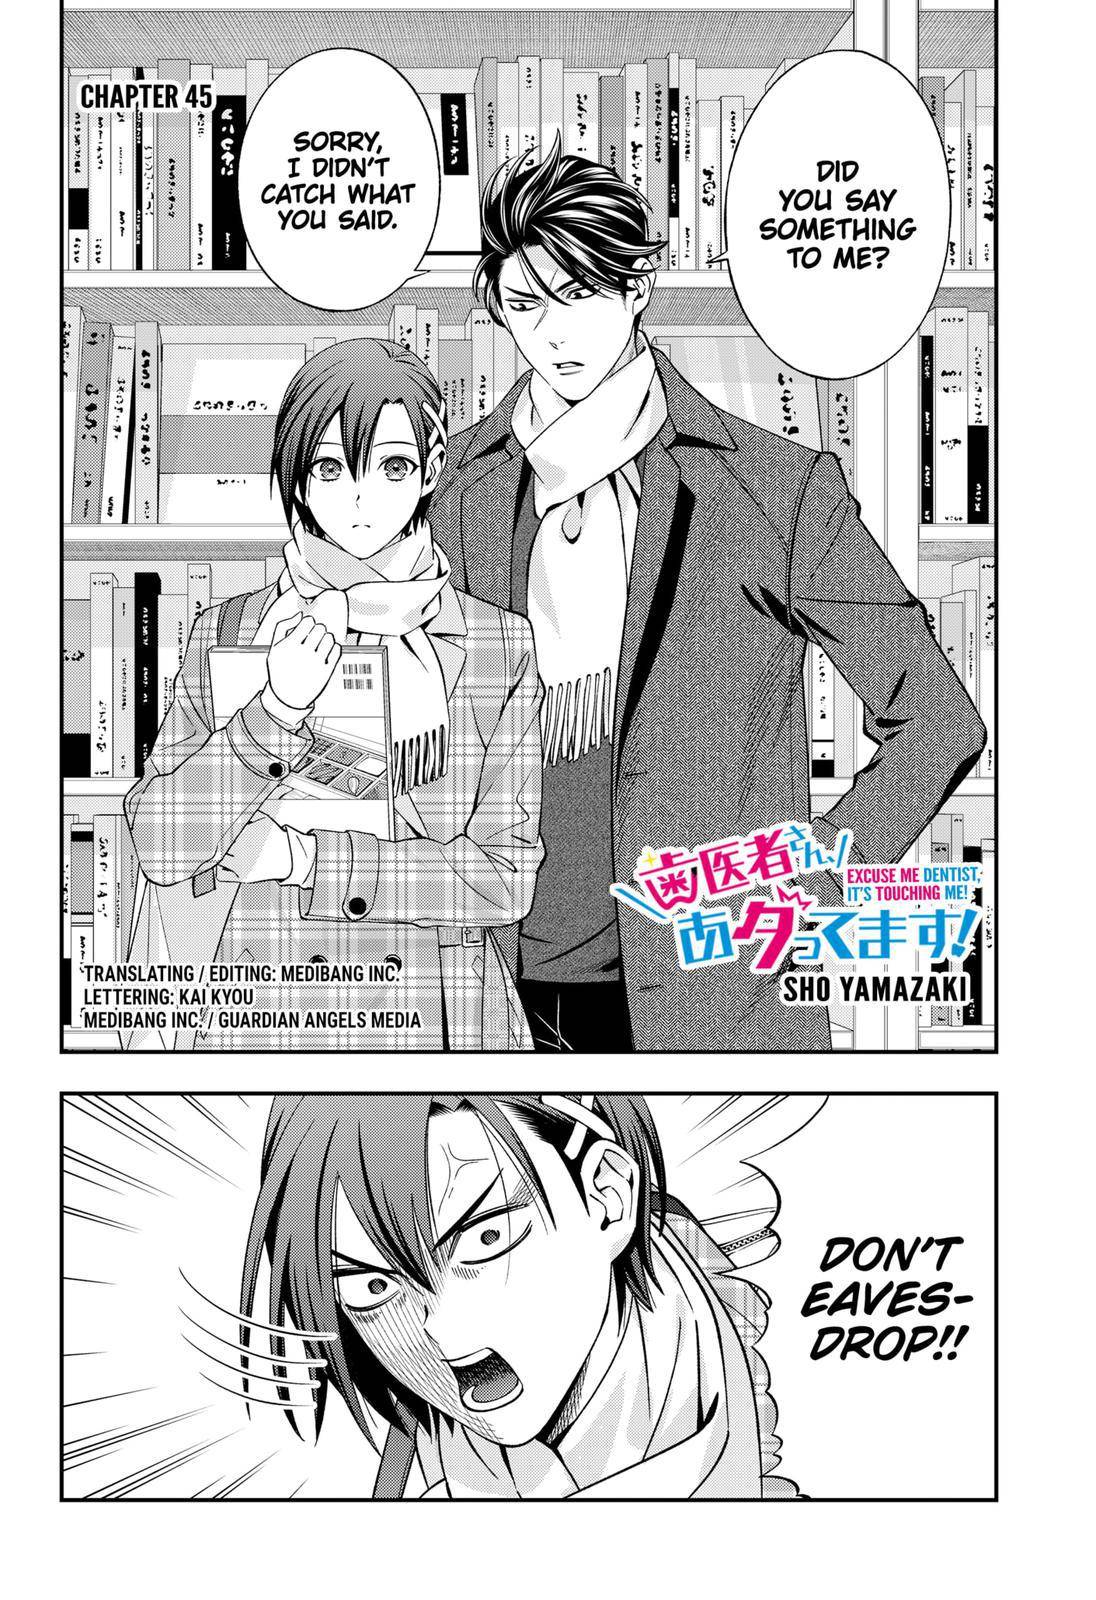 Dentist-San, Your Boobs Are Touching Me! - chapter 45 - #2